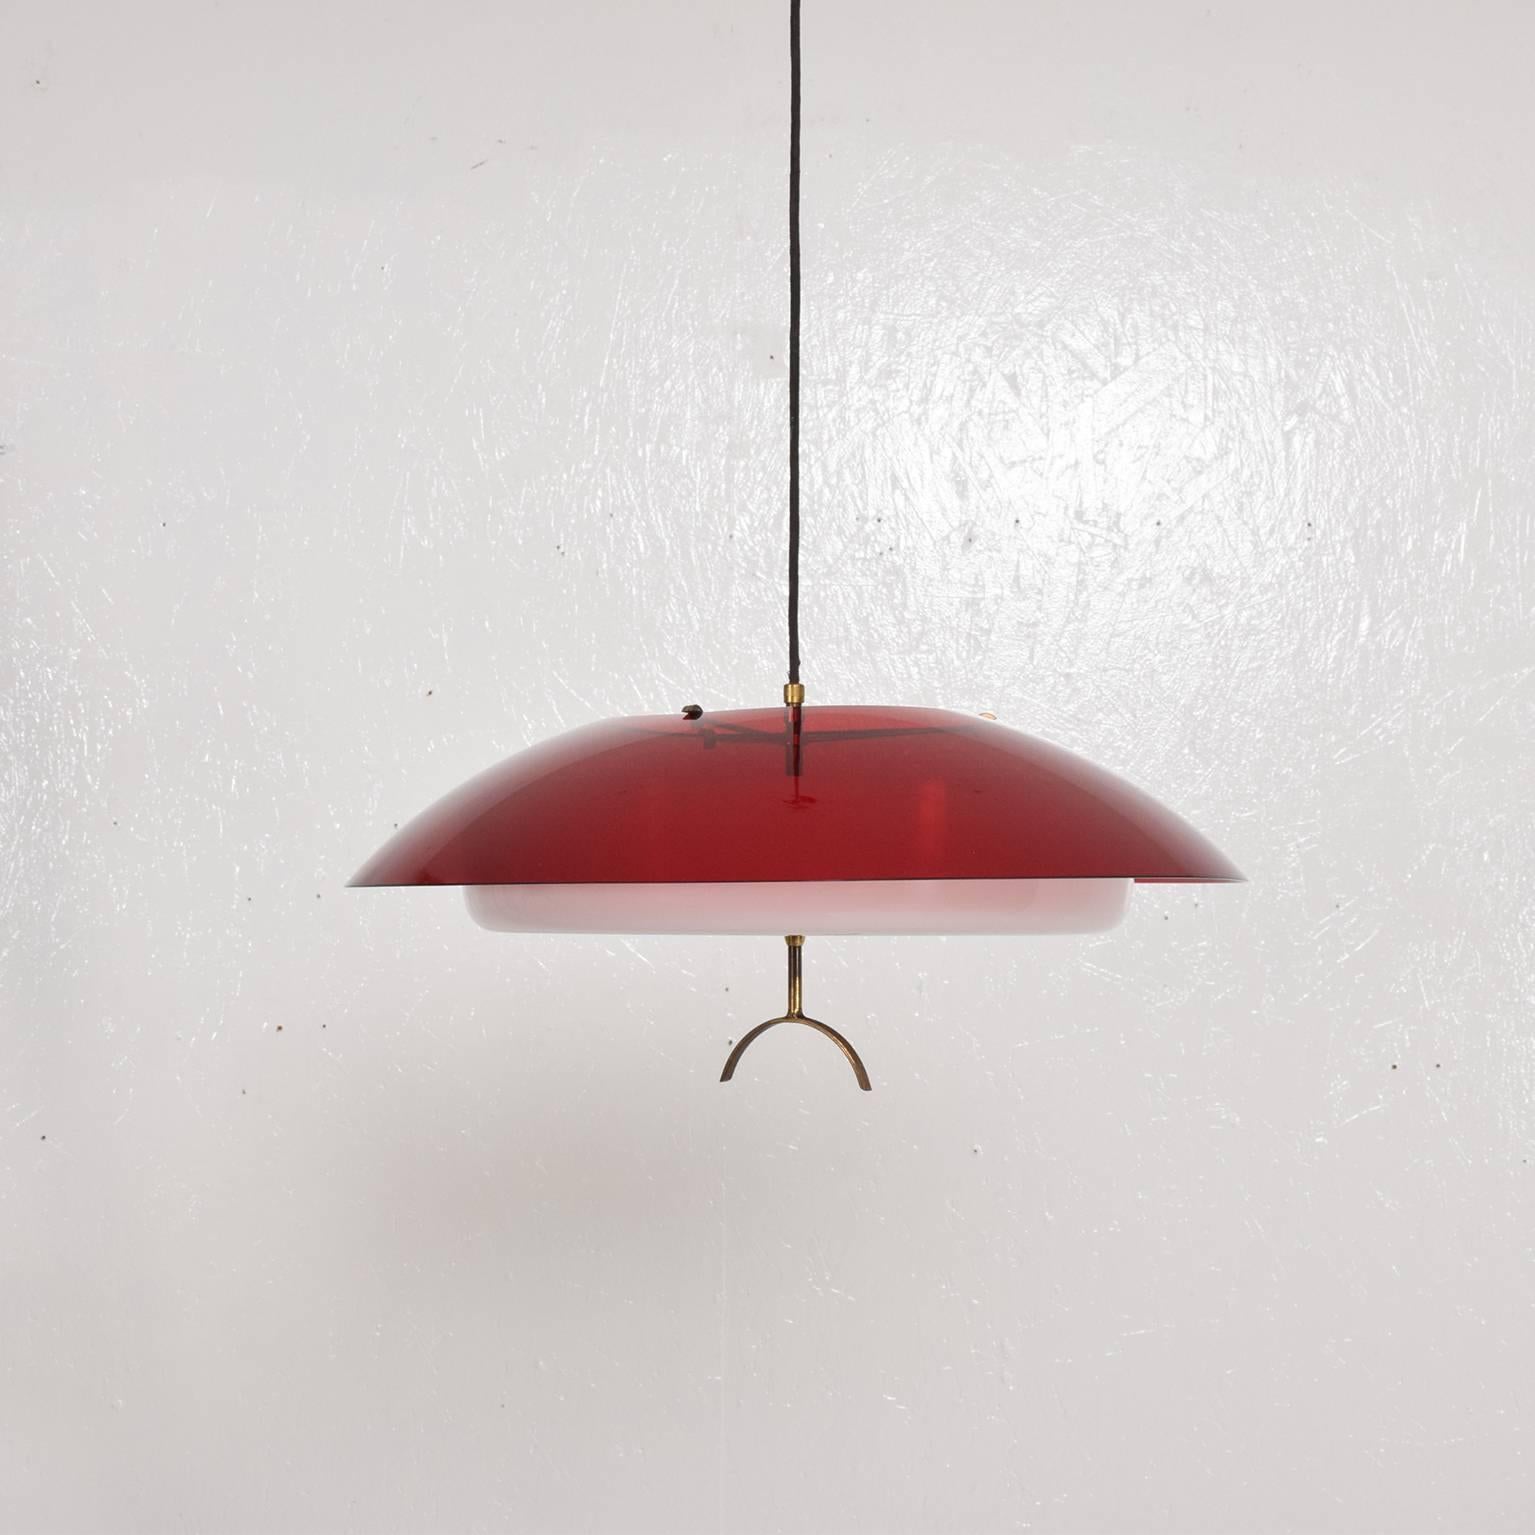 A beautiful sculptural pendant light fixture by Stilux.  Made in Italy circa 1960s. 
Two tone moulded plexiglass in white and translucent red color with patinated brass hardware. 
It requires three 3 e-14 bulbs. 

Dimensions: 6" H. 20" in